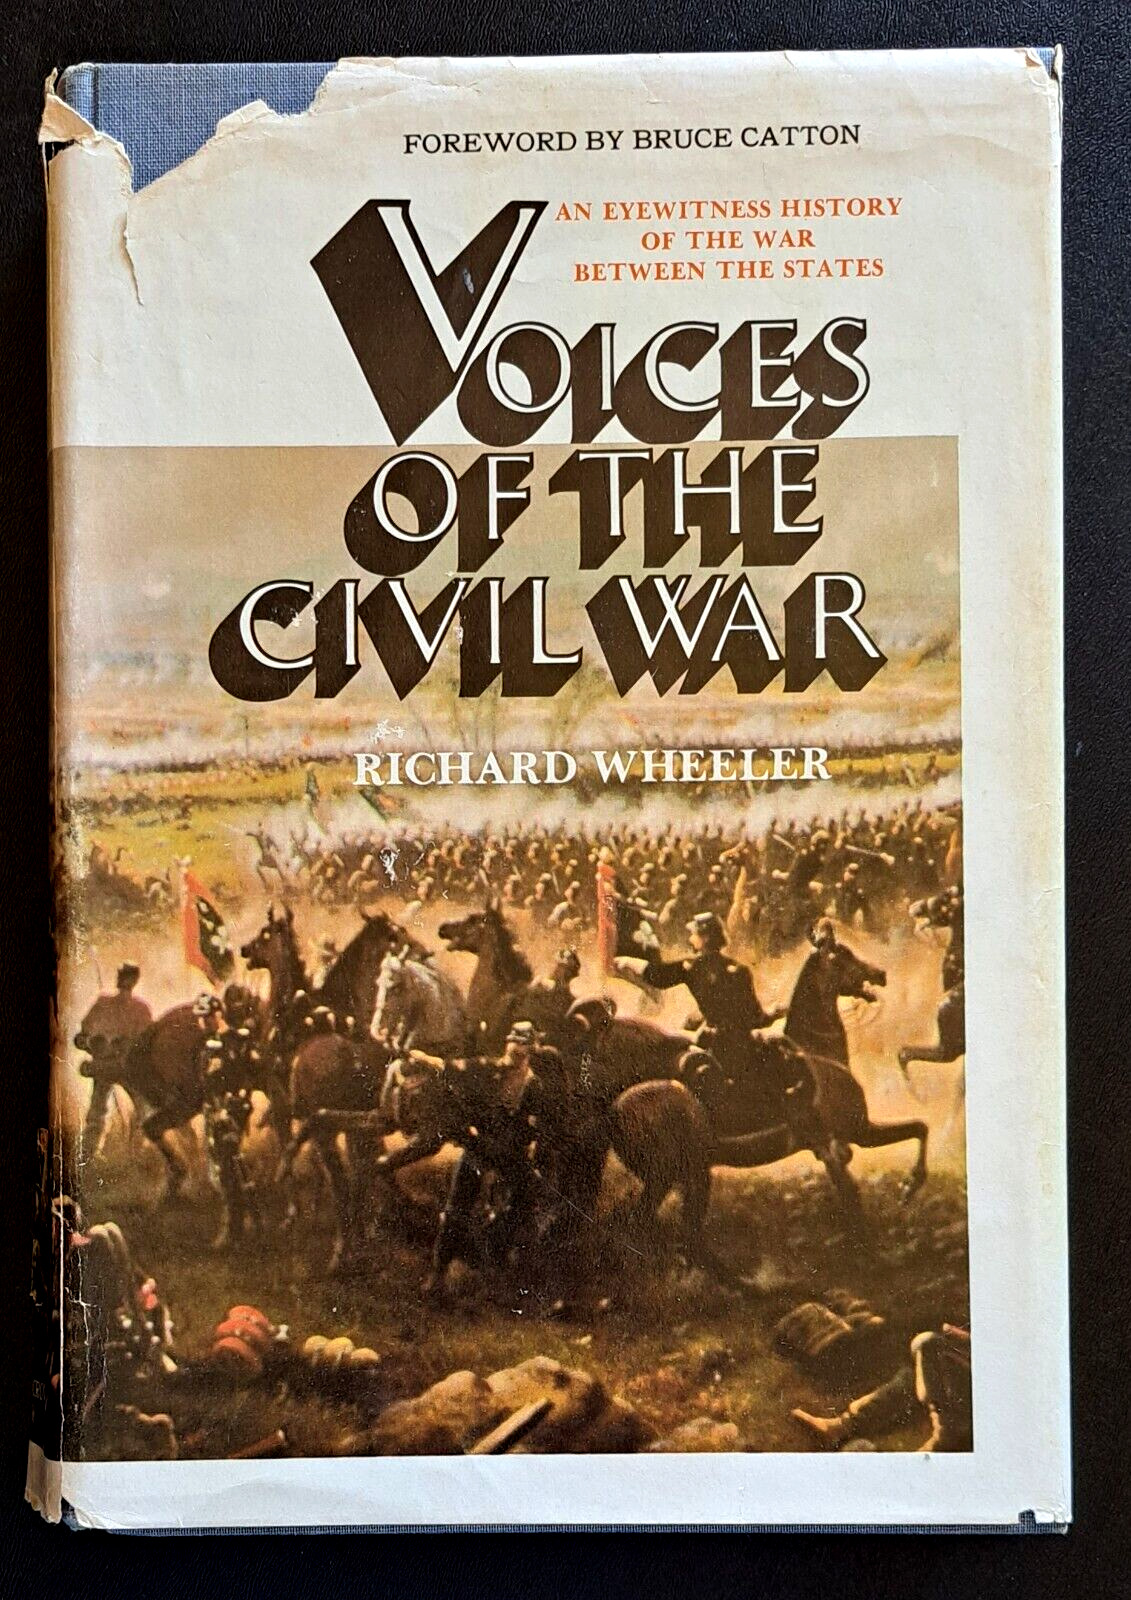 Voices of the Civil War by Richard Wheeler, publ by Thomas Y Crowell Co, 1976